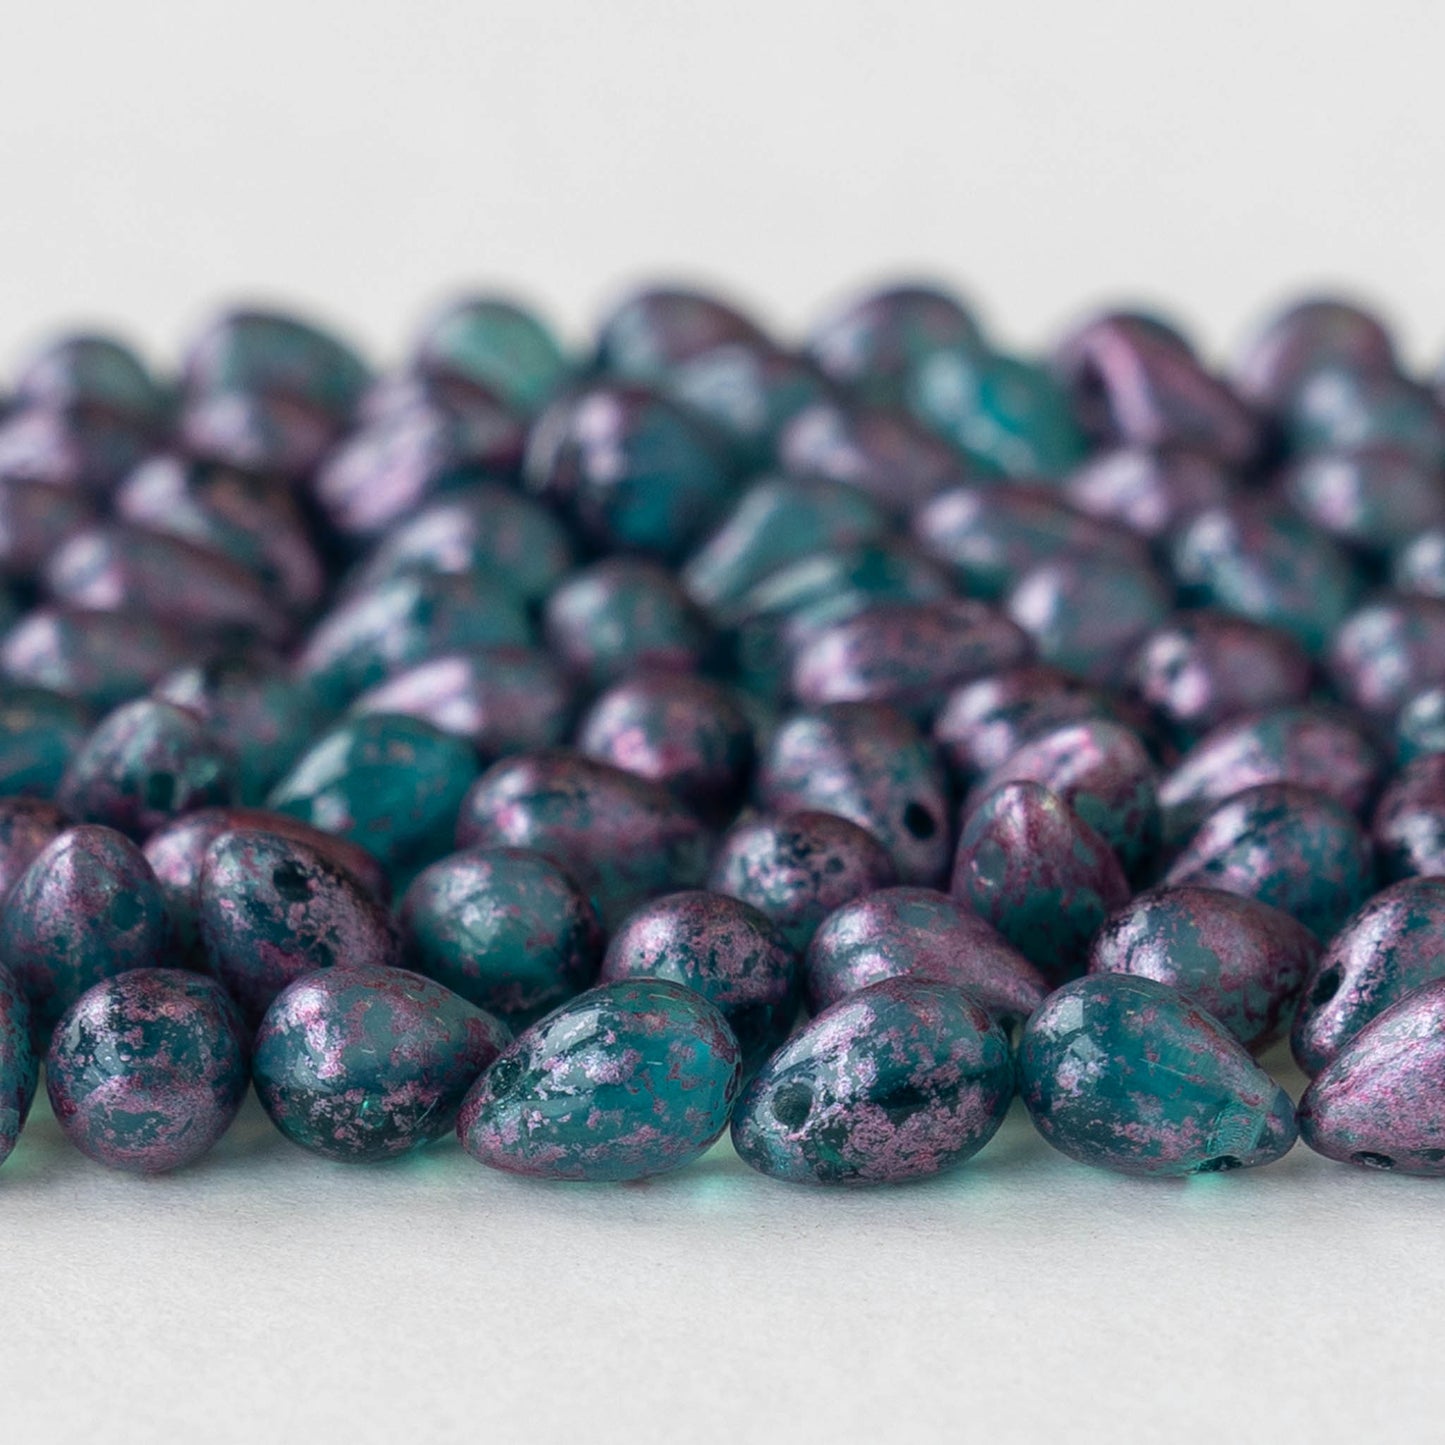 Load image into Gallery viewer, 5x7mm Glass Teardrop Beads - Teal with Metallic Pink Dust - 50 Beads
